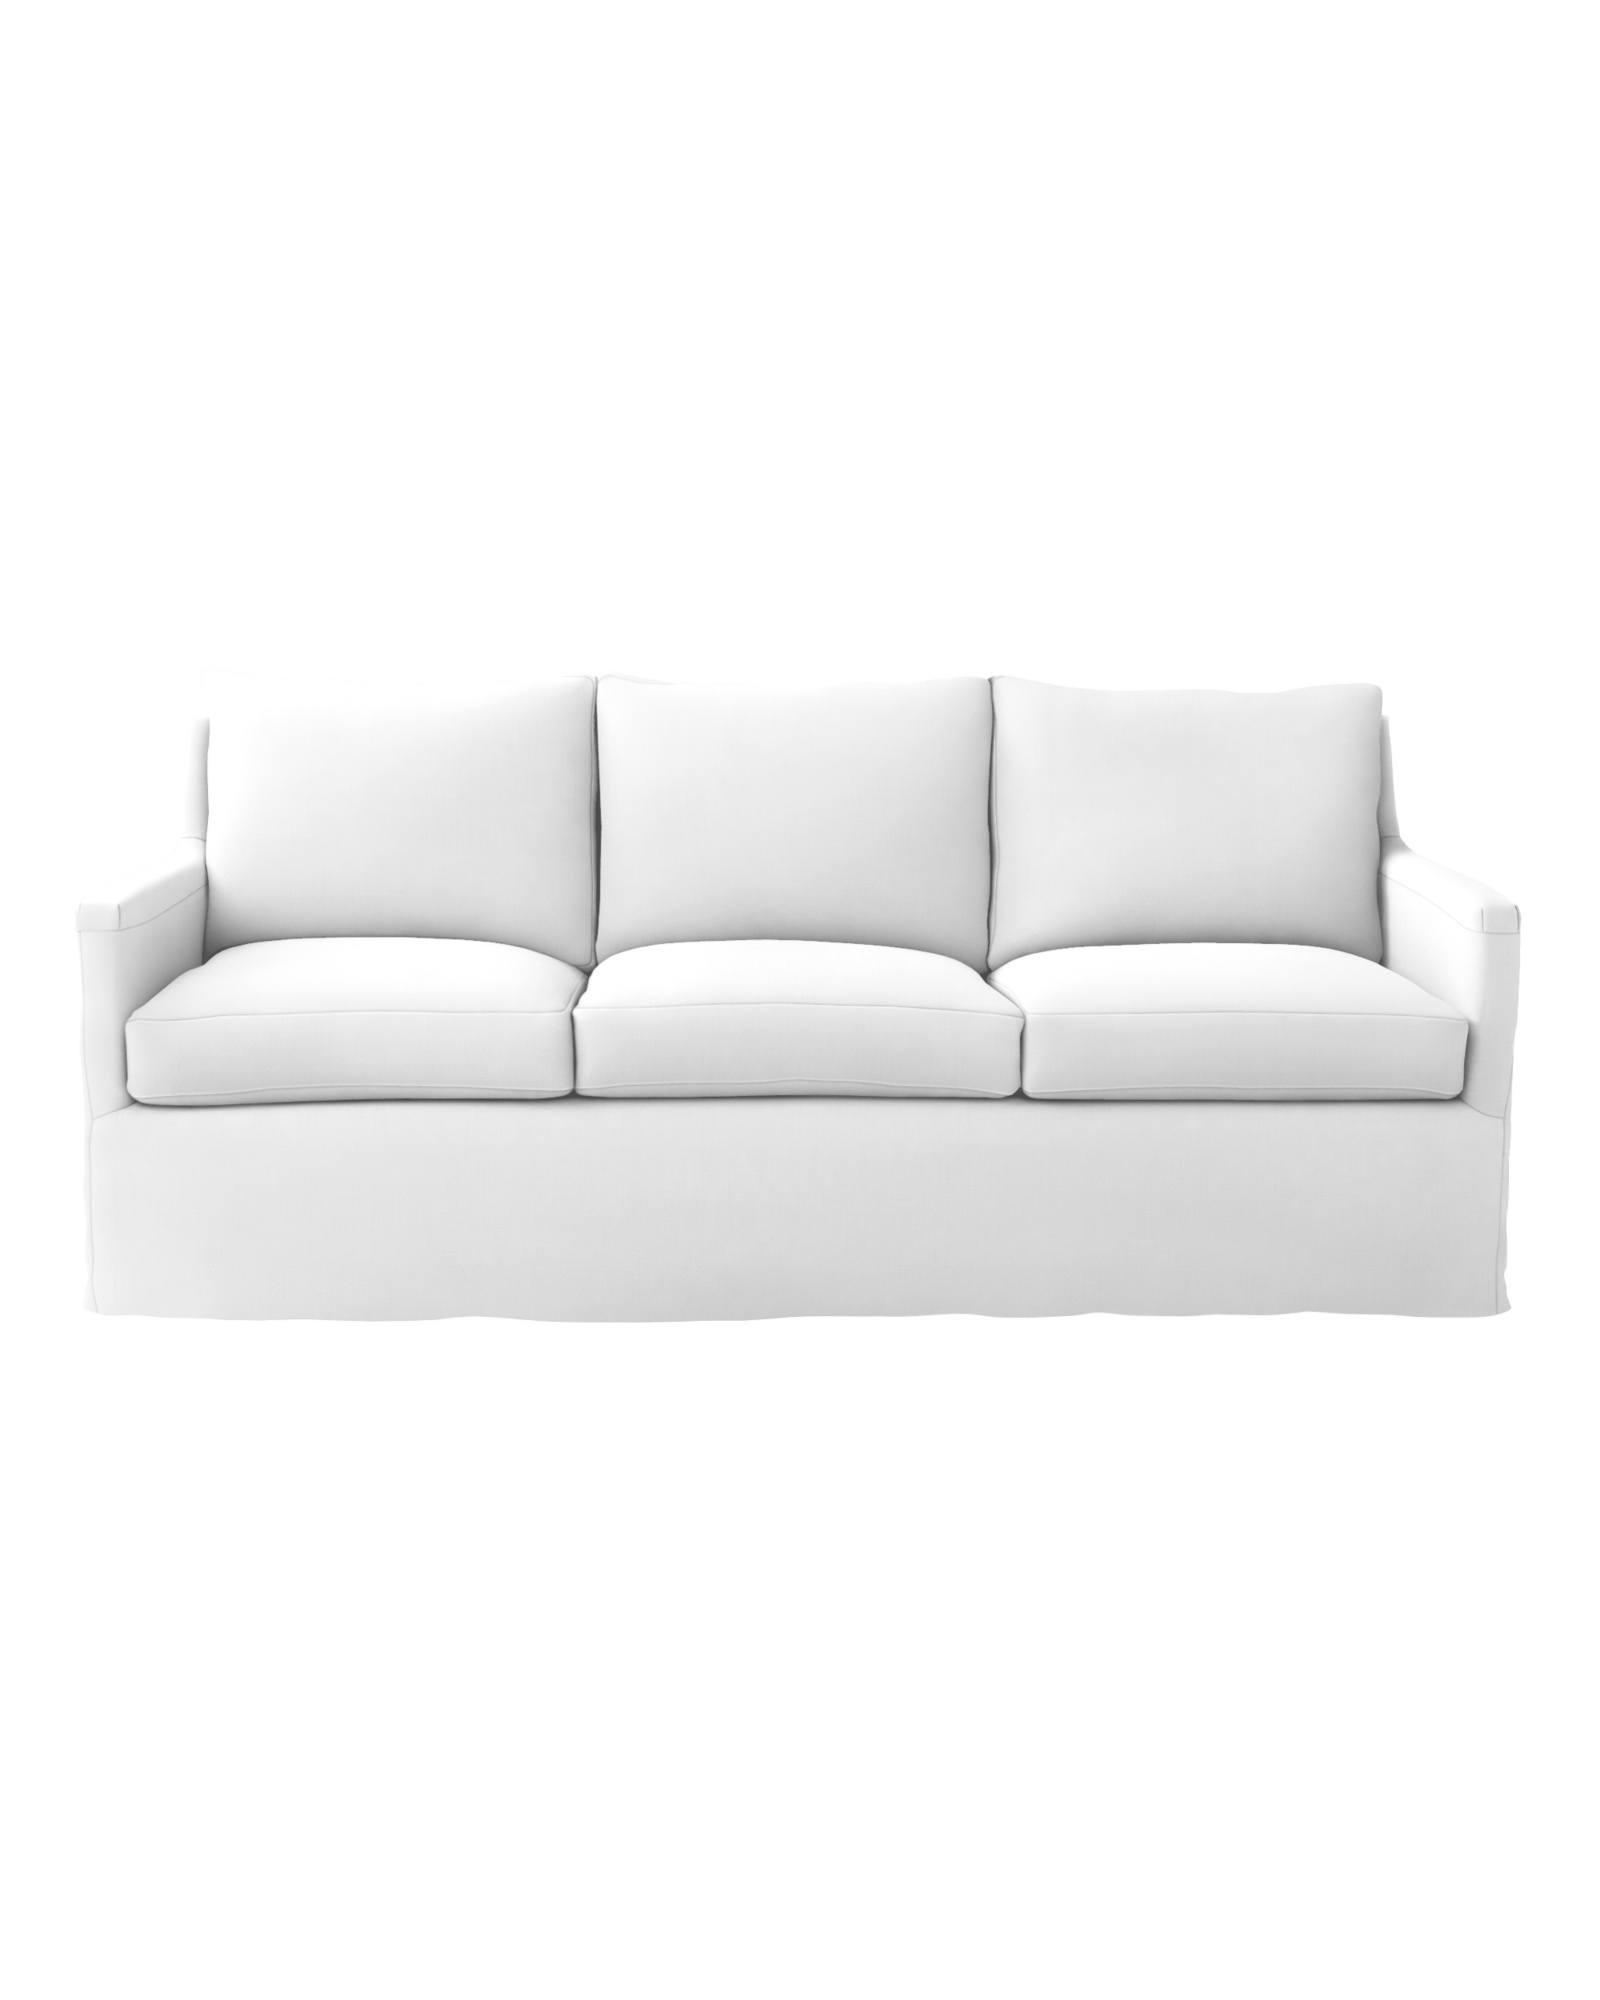 Slipcovered three seat sofa - Spruce Street by Serena & Lily